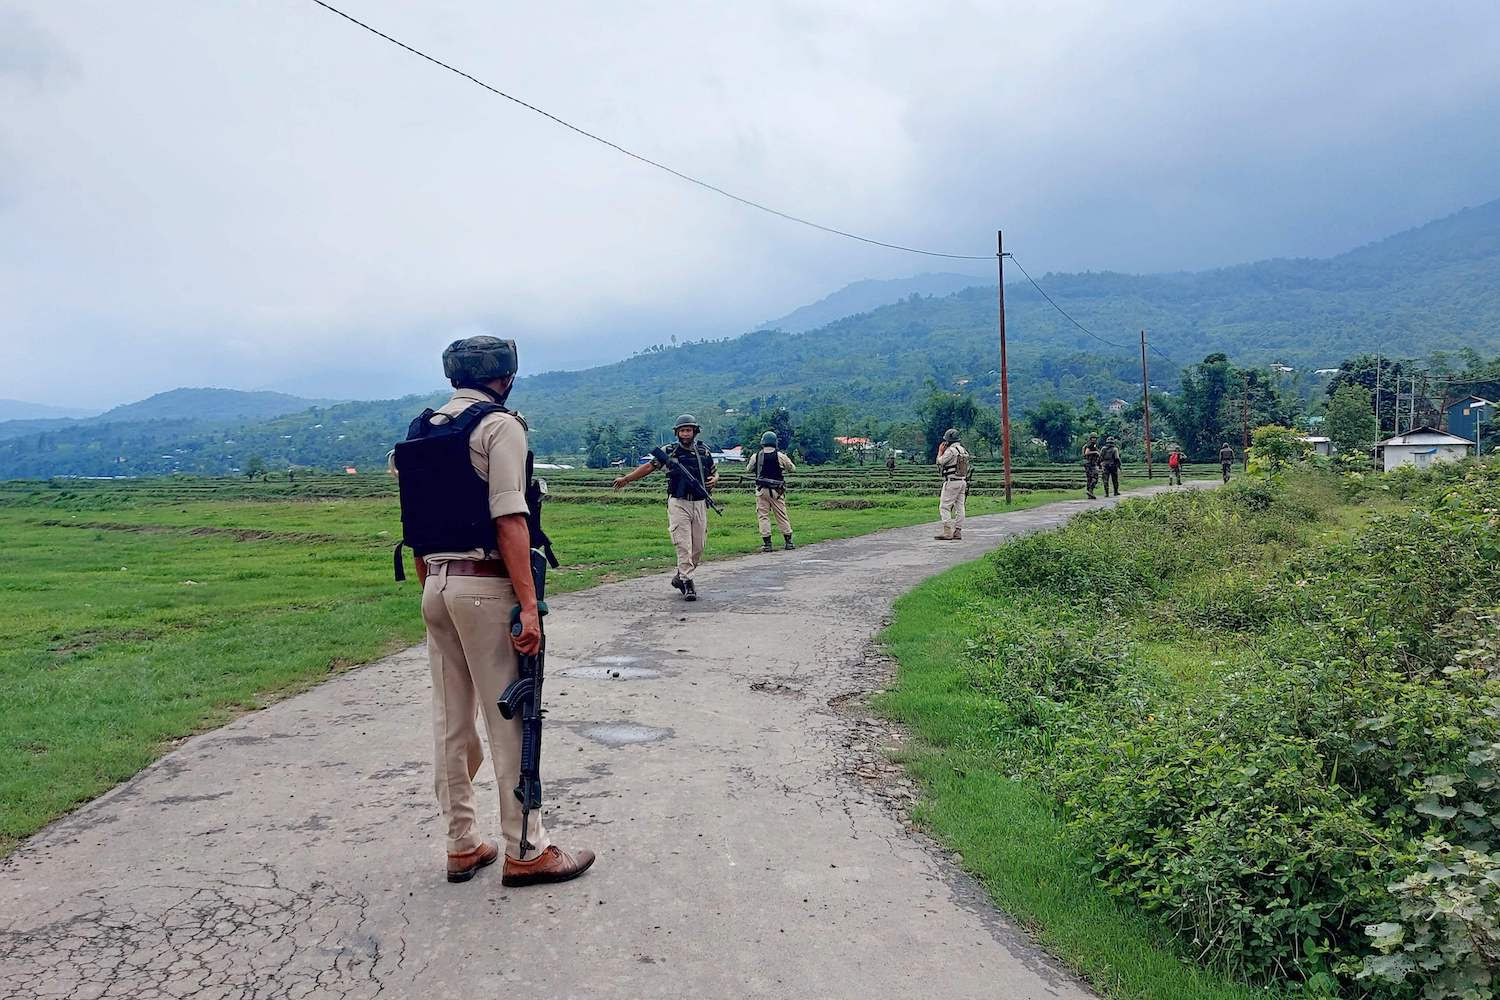 Uniformed Indian Army and police officers walk along a curved road in a foggy green valley. Some of the officers carry rifles, and most wear helmets.